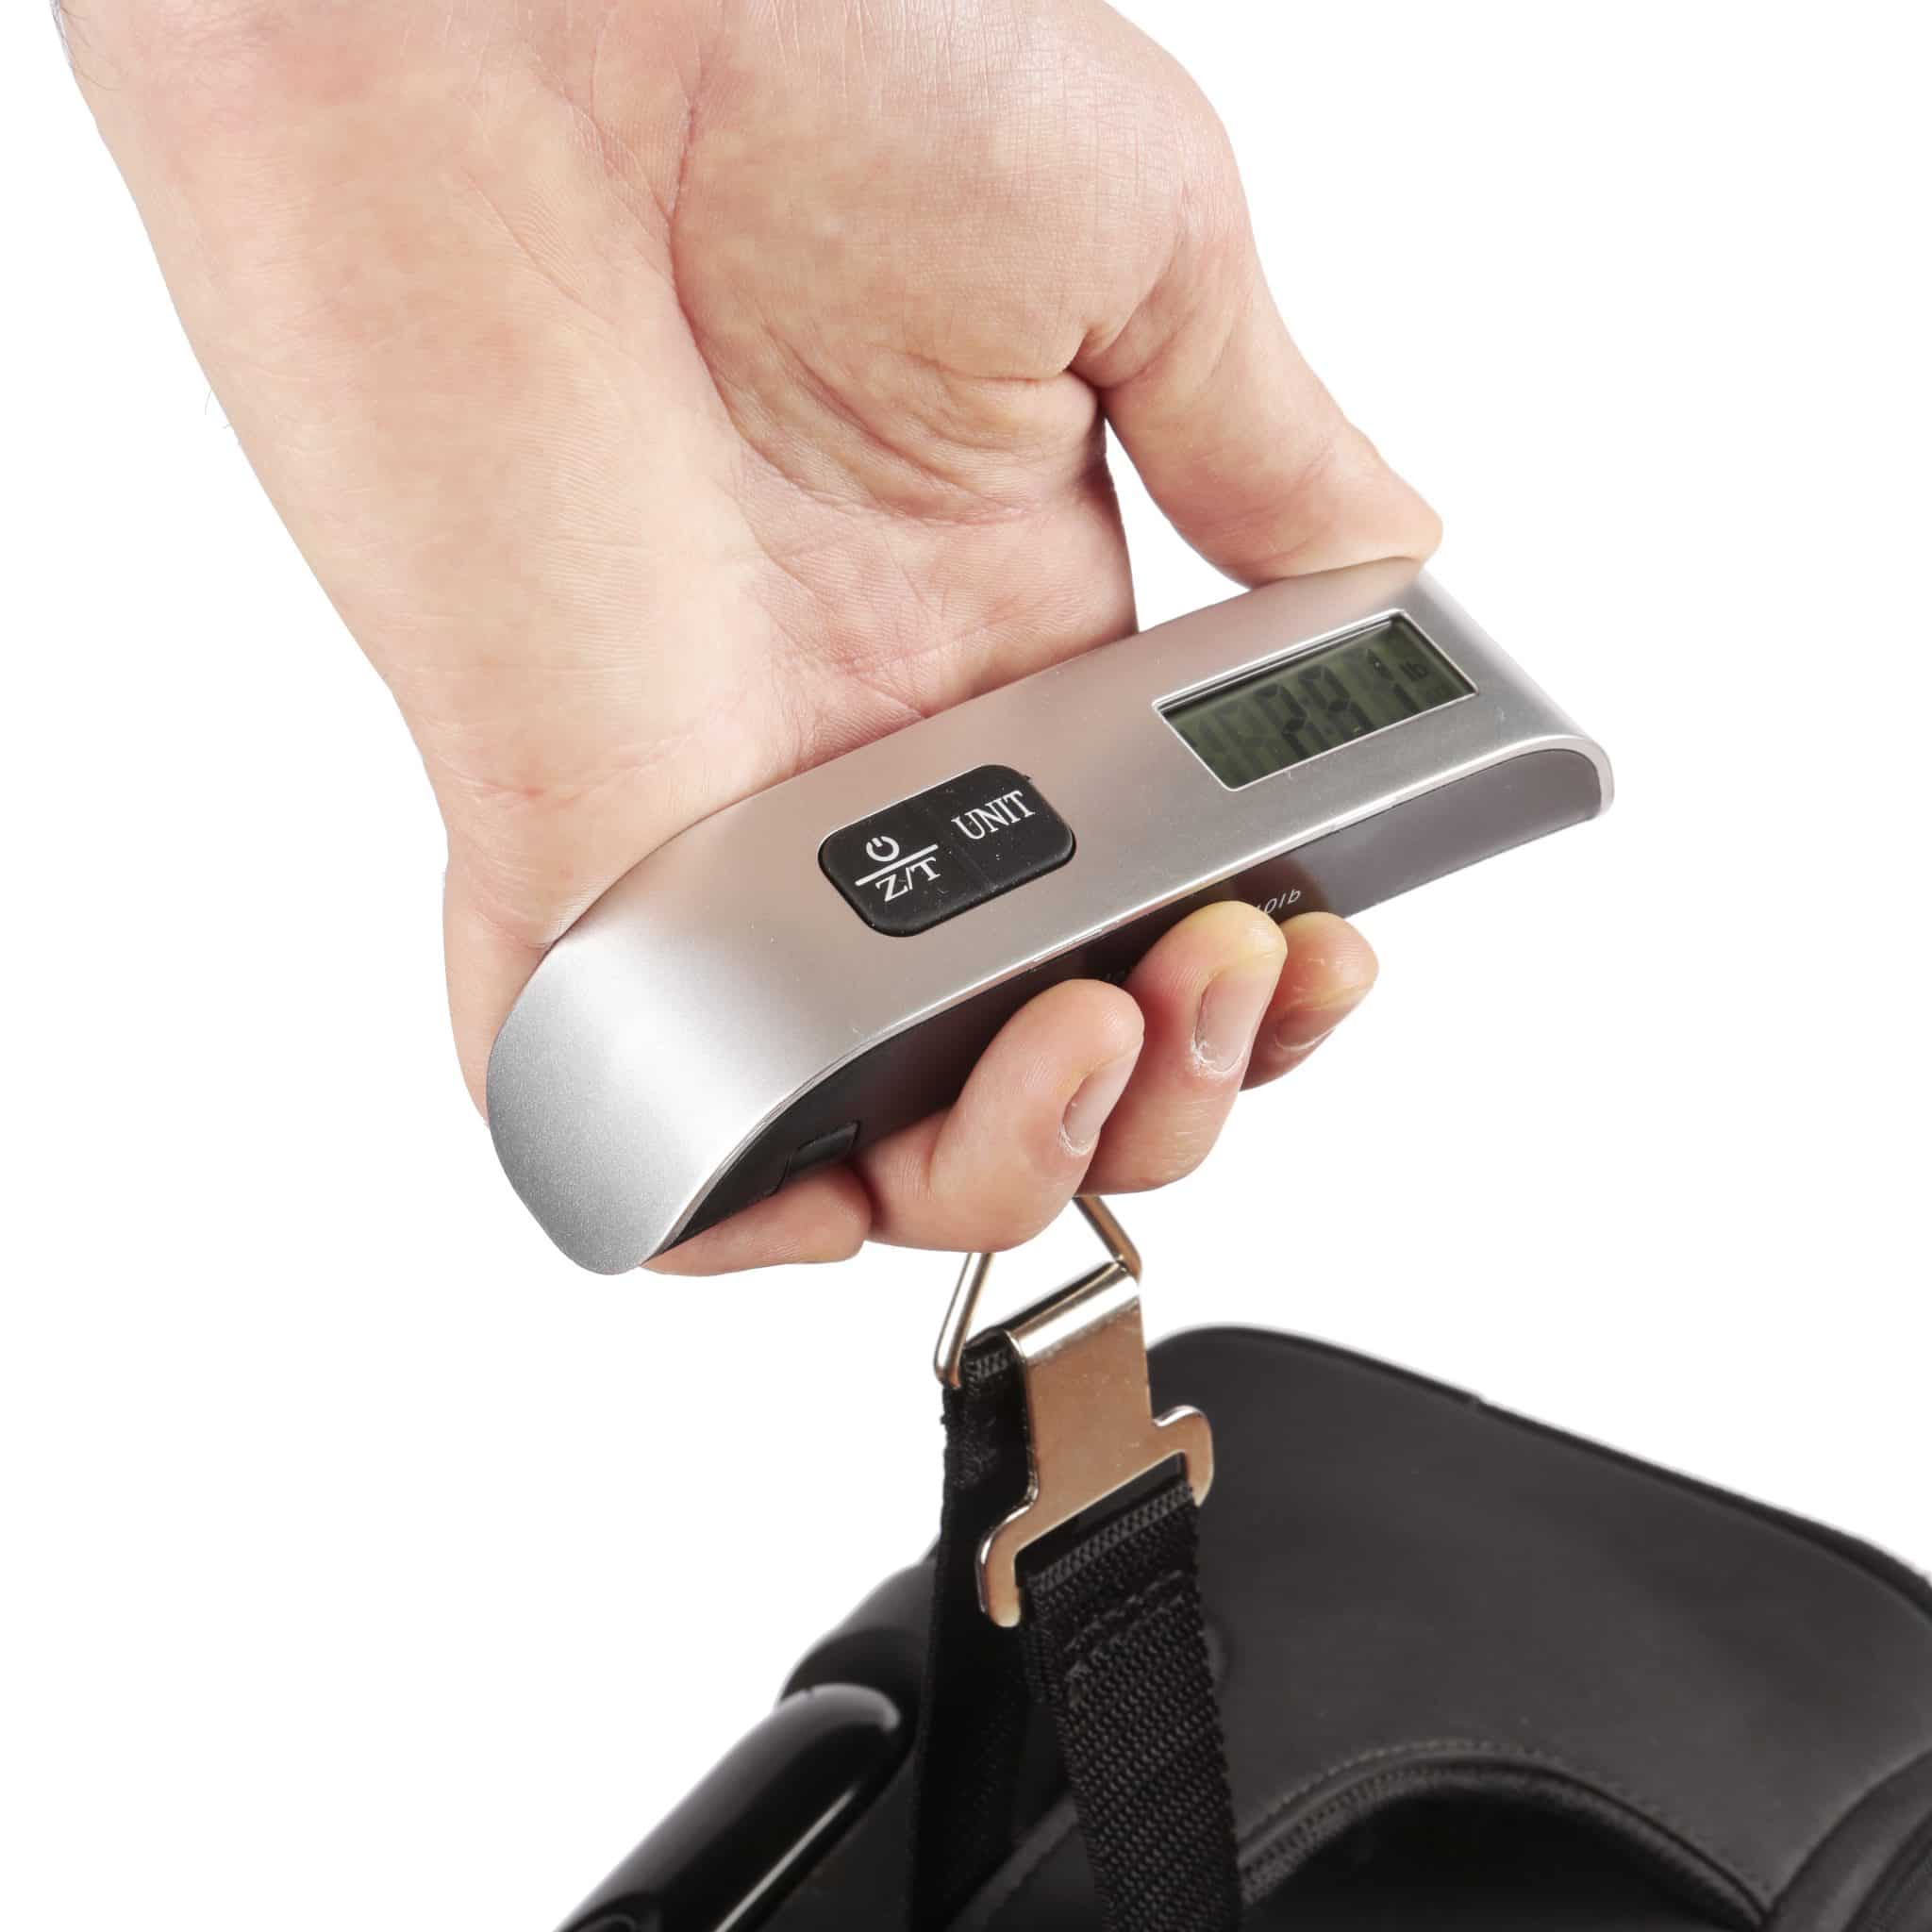 Travel Luggage Scales - Accurate, Lightweight and Travel-Friendly